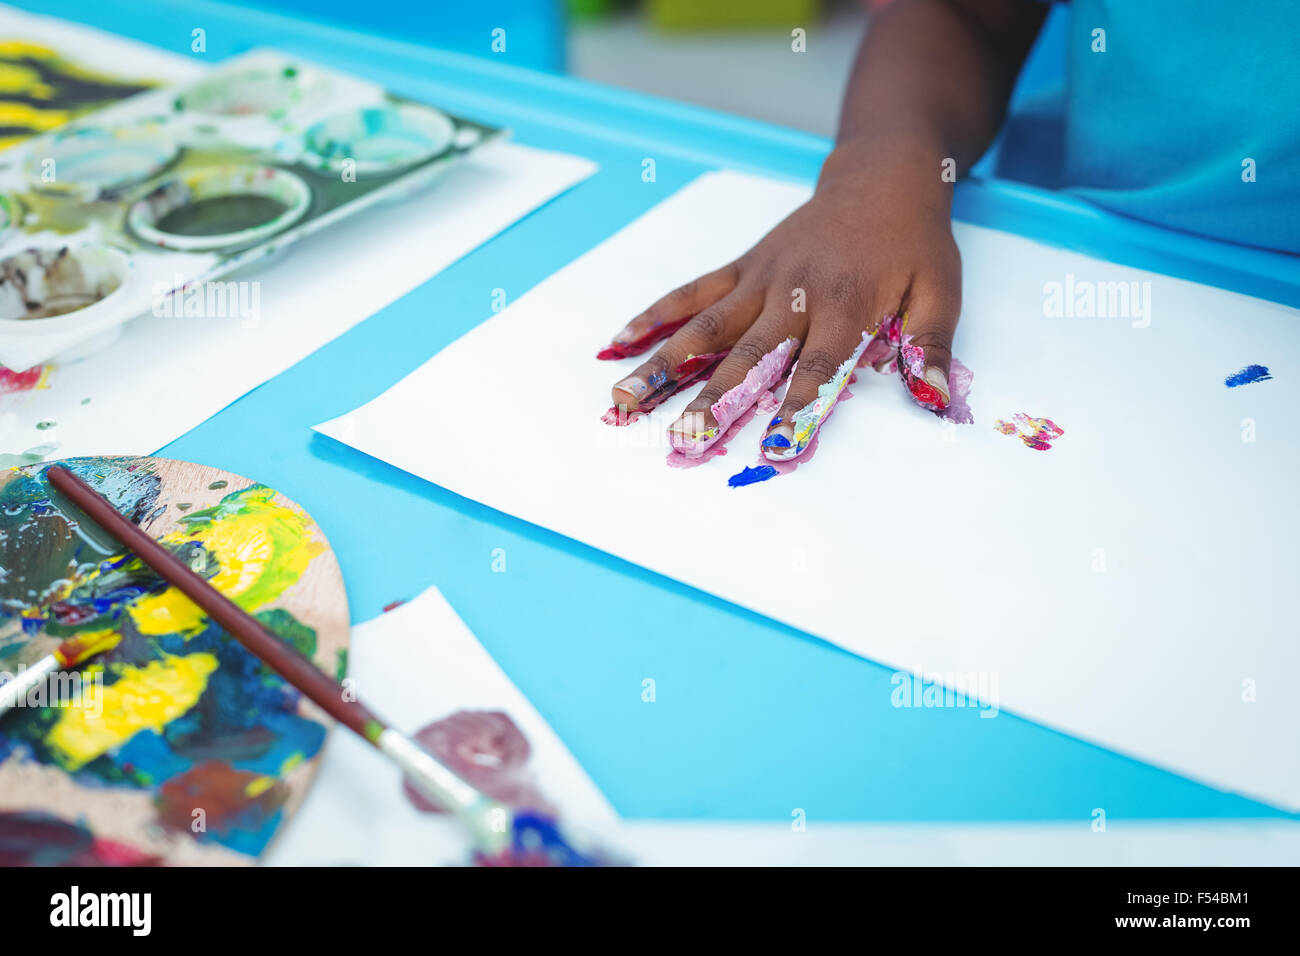 Happy kid enjoying painting with his hands Stock Photo